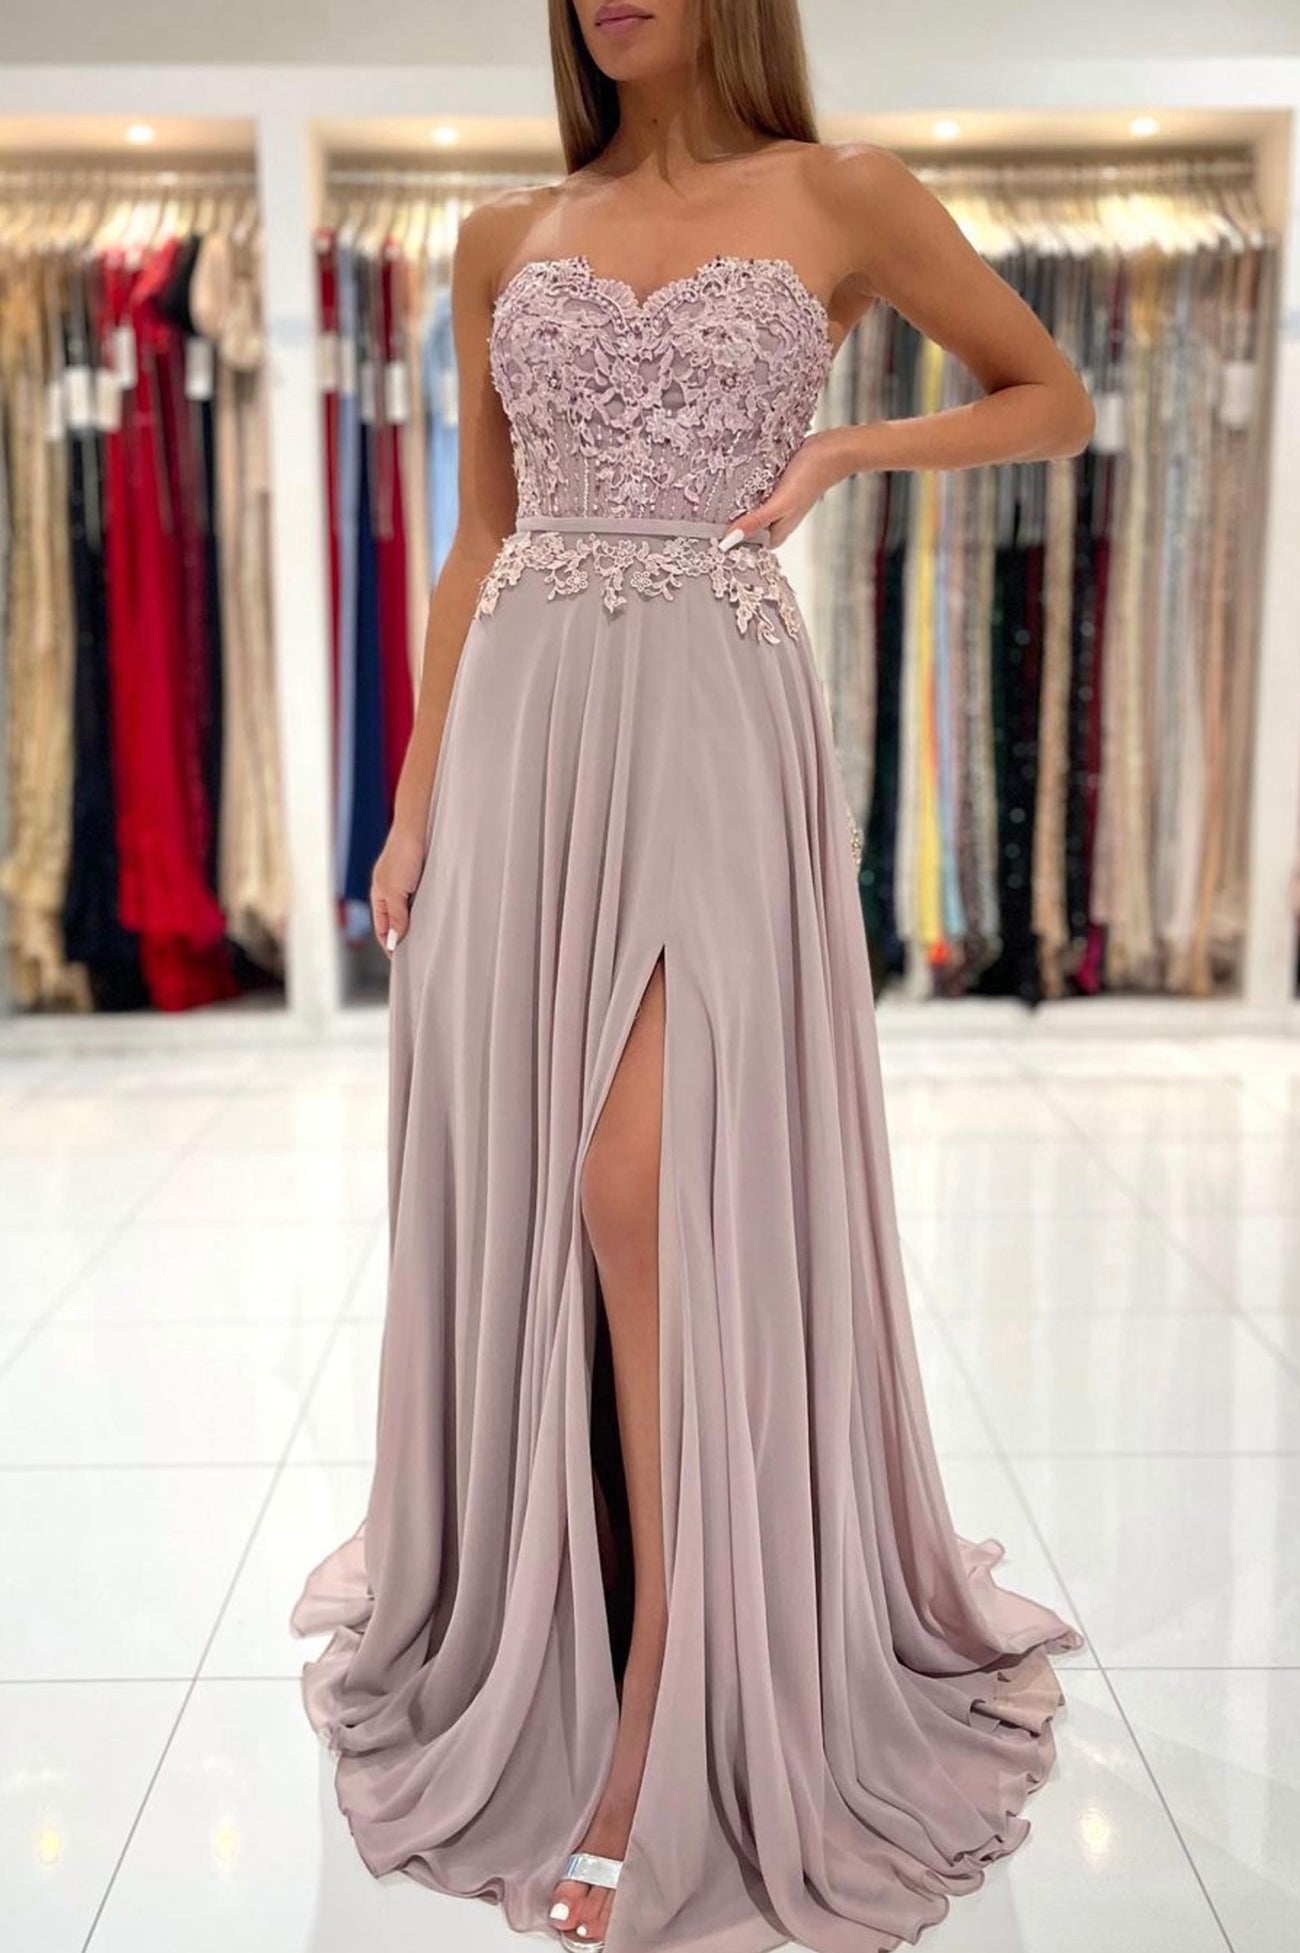 Cute Chiffon Lace Long A-Line Prom Dress, Cute Strapless Party Dress with Slit